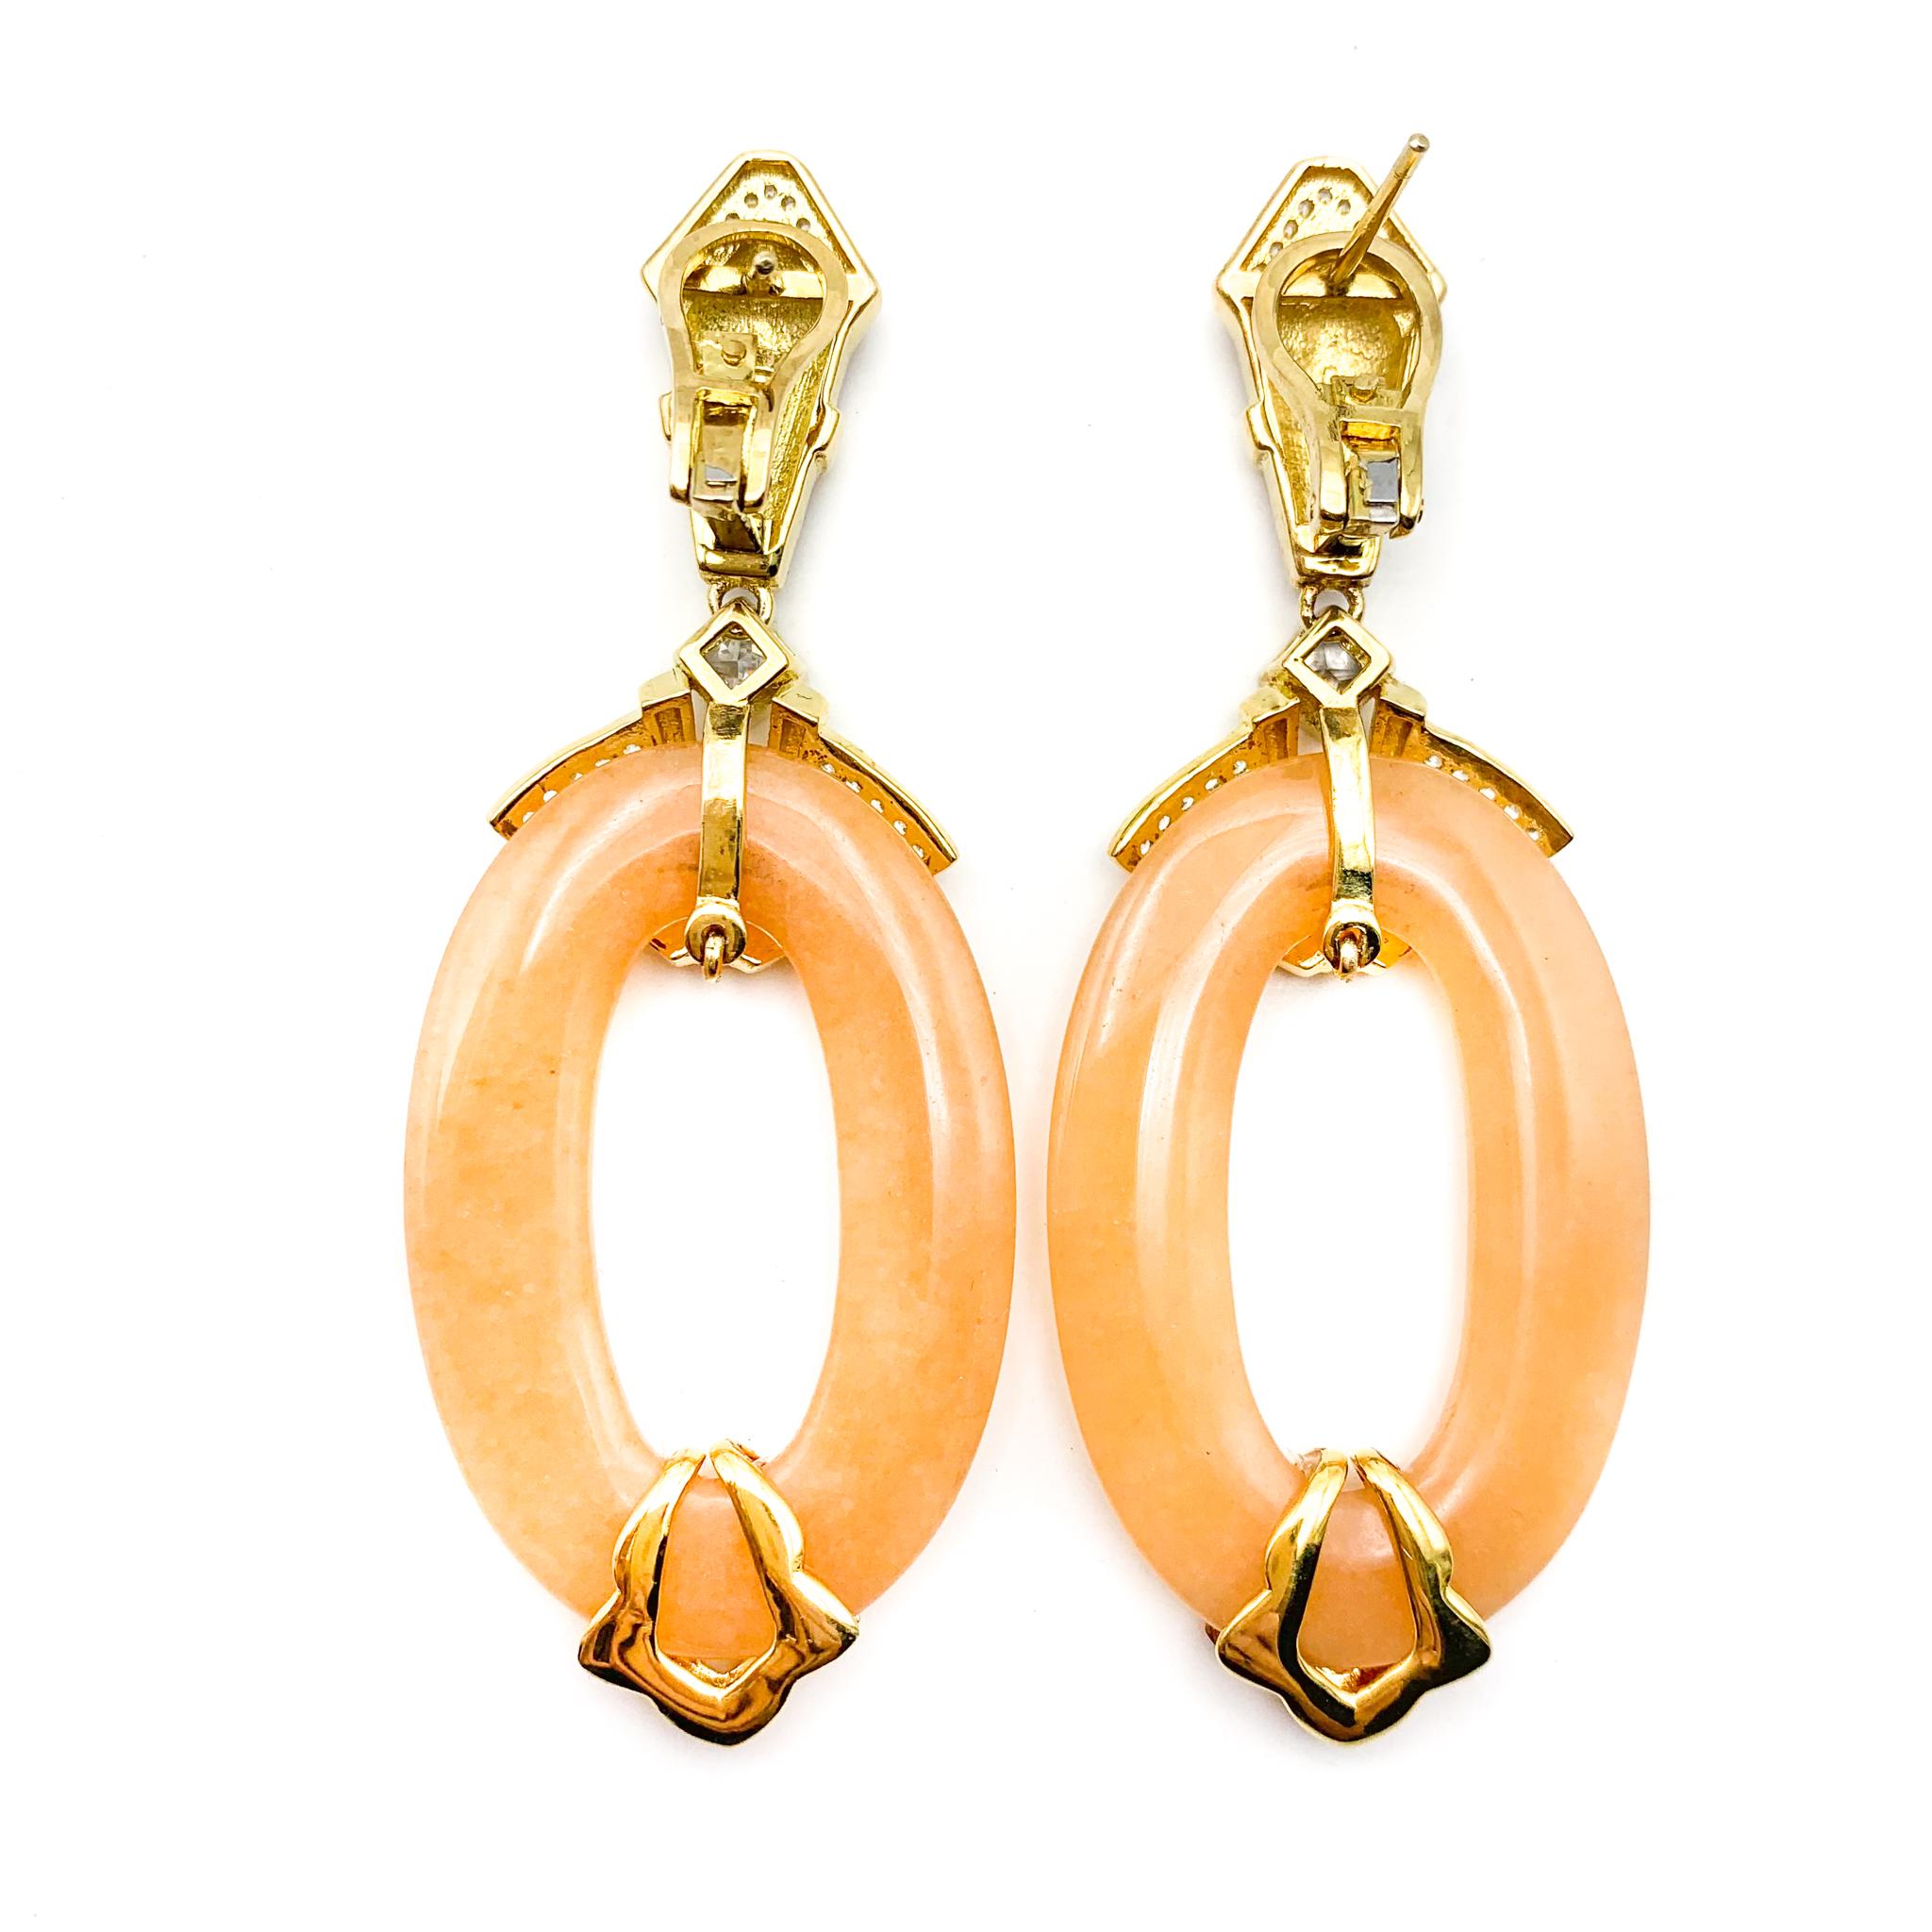 Cristina Sabatini design
Ginger color agate & white topaz 
Round/Oval Dangle earrings 
Approximately 3 inches in length 